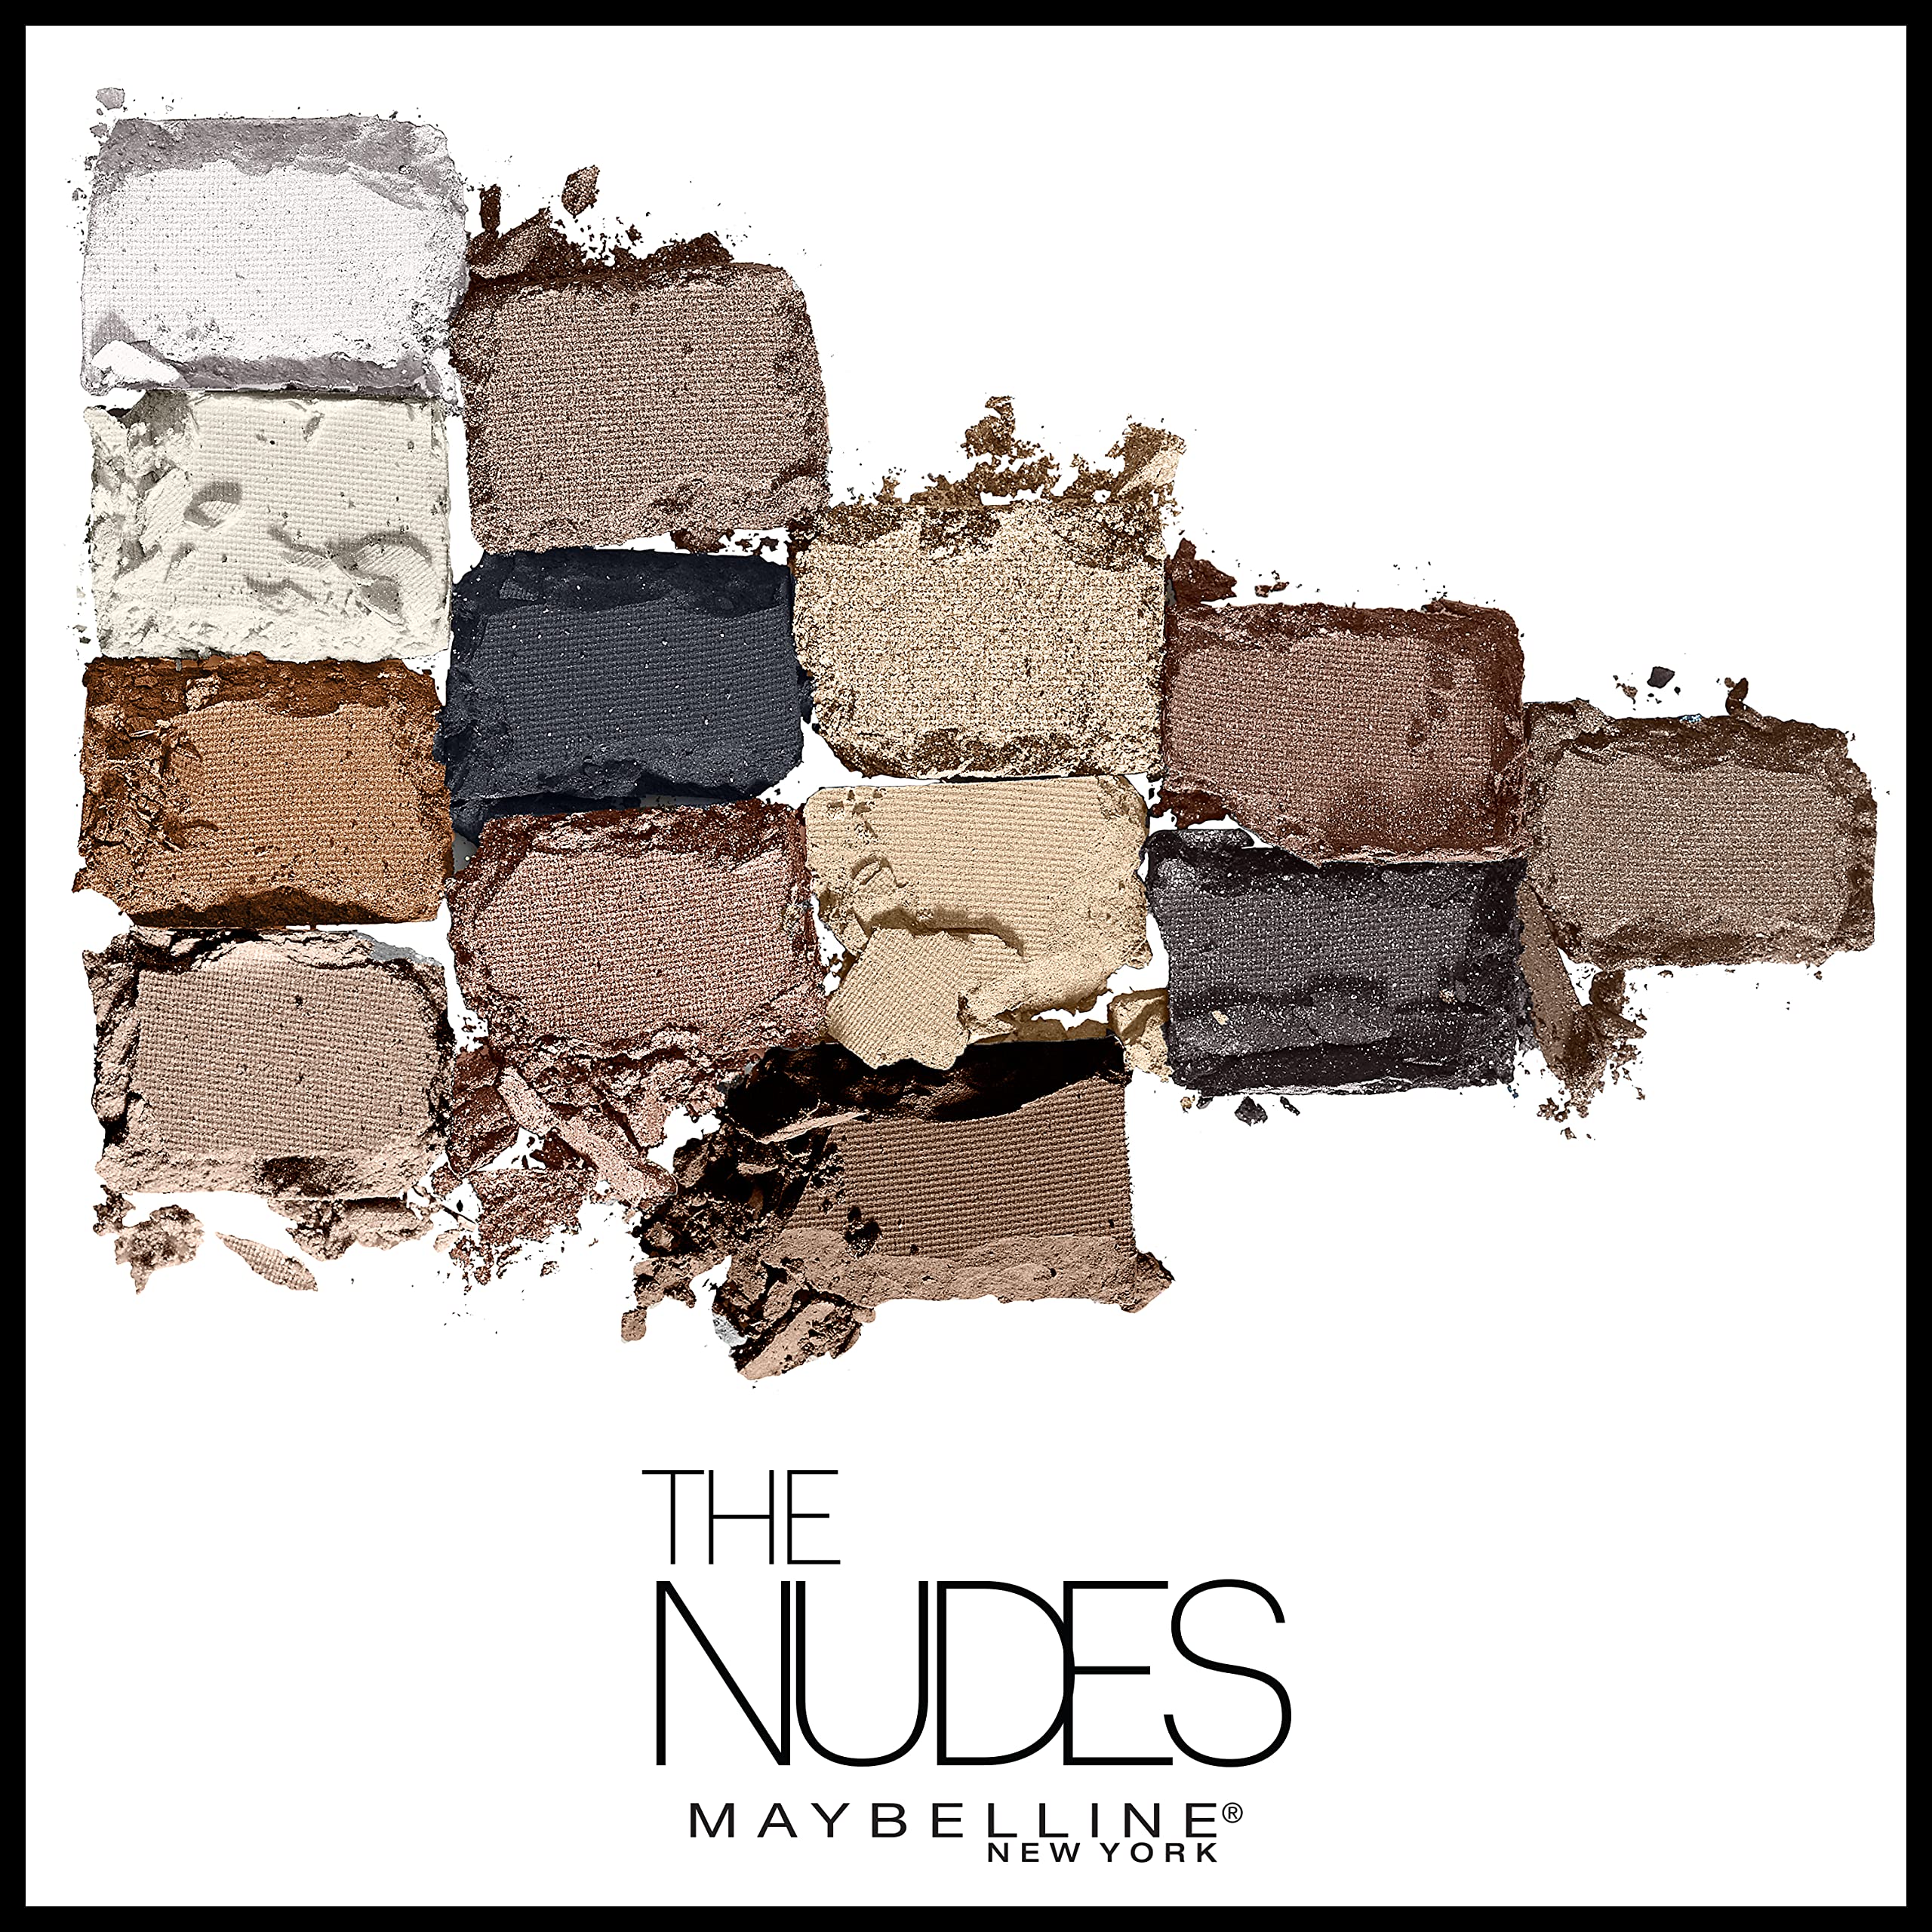 Maybelline The Nudes Eyeshadow Palette Makeup, 12 Pigmented Matte & Shimmer Shades, Blendable Powder, 1 Count